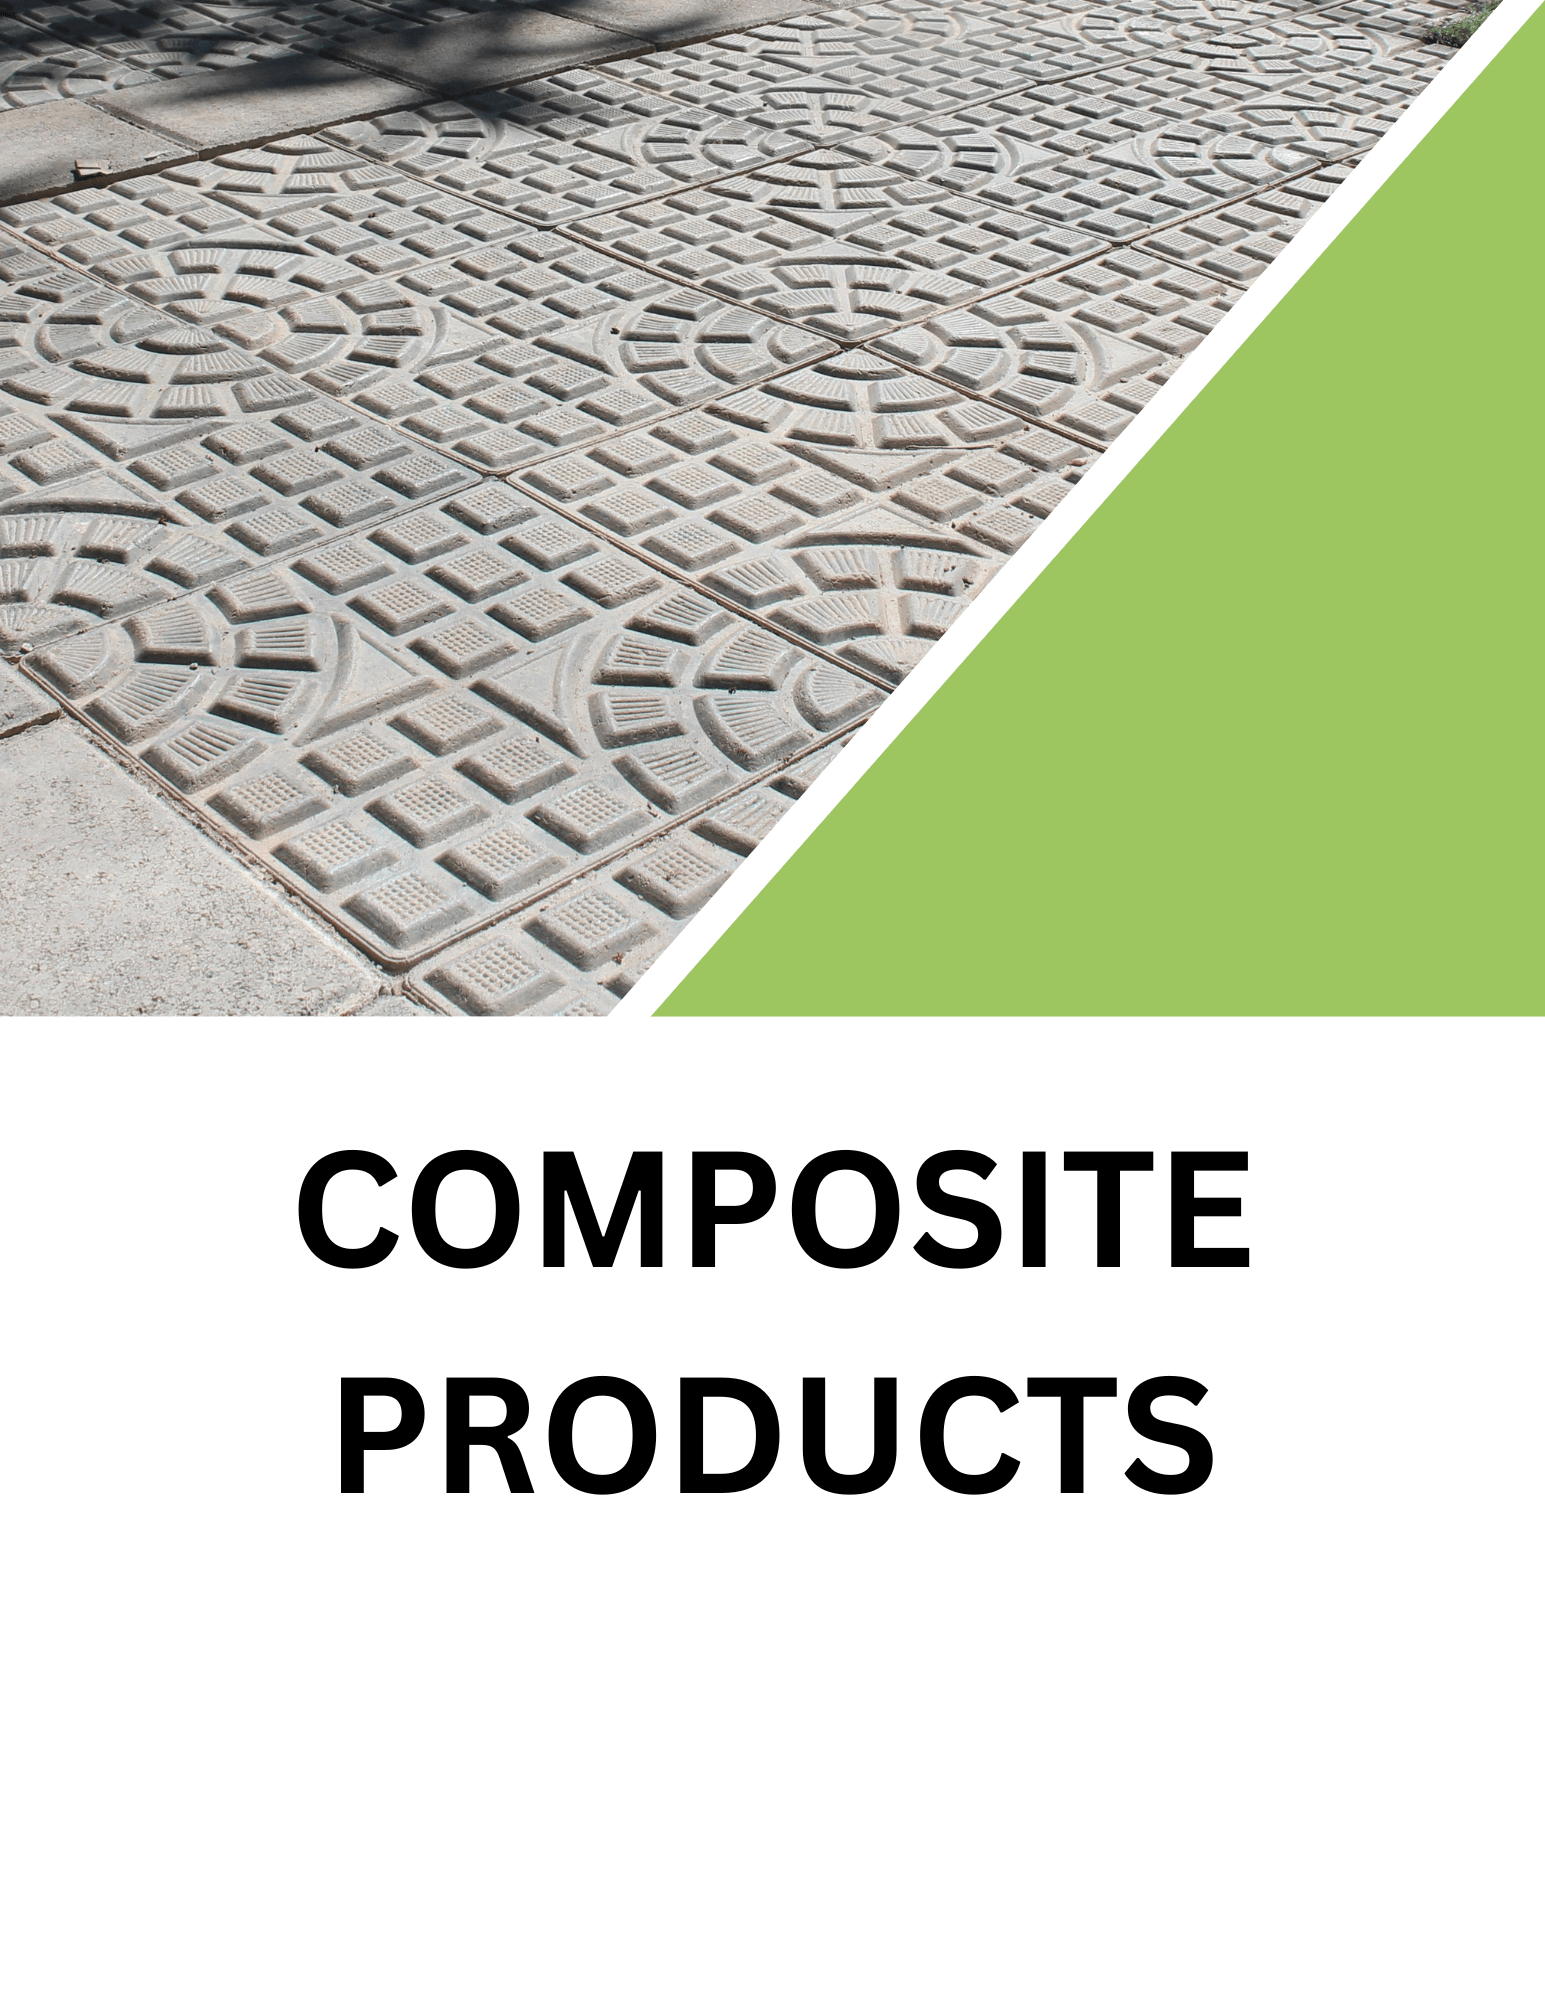 Composite Products